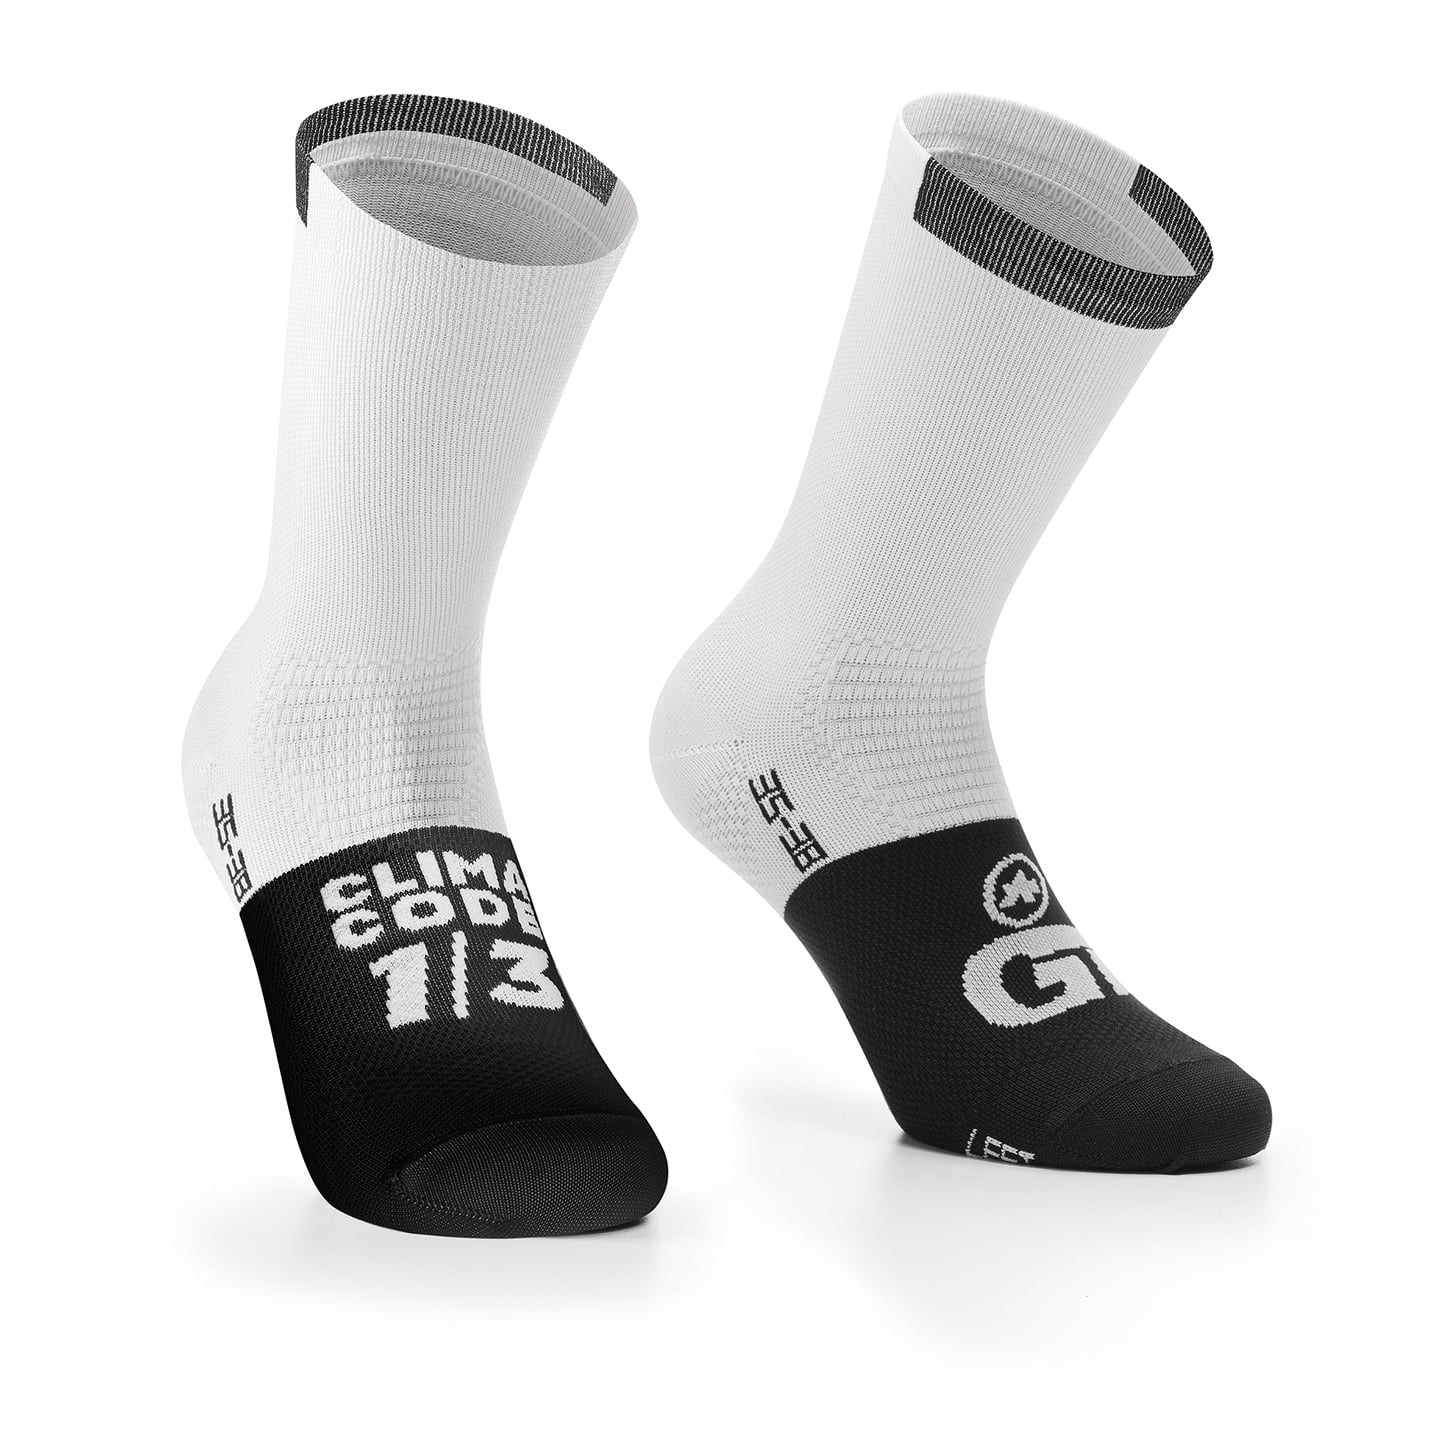 ASSOS Mille GT Cycling Socks, for men, size XS-S